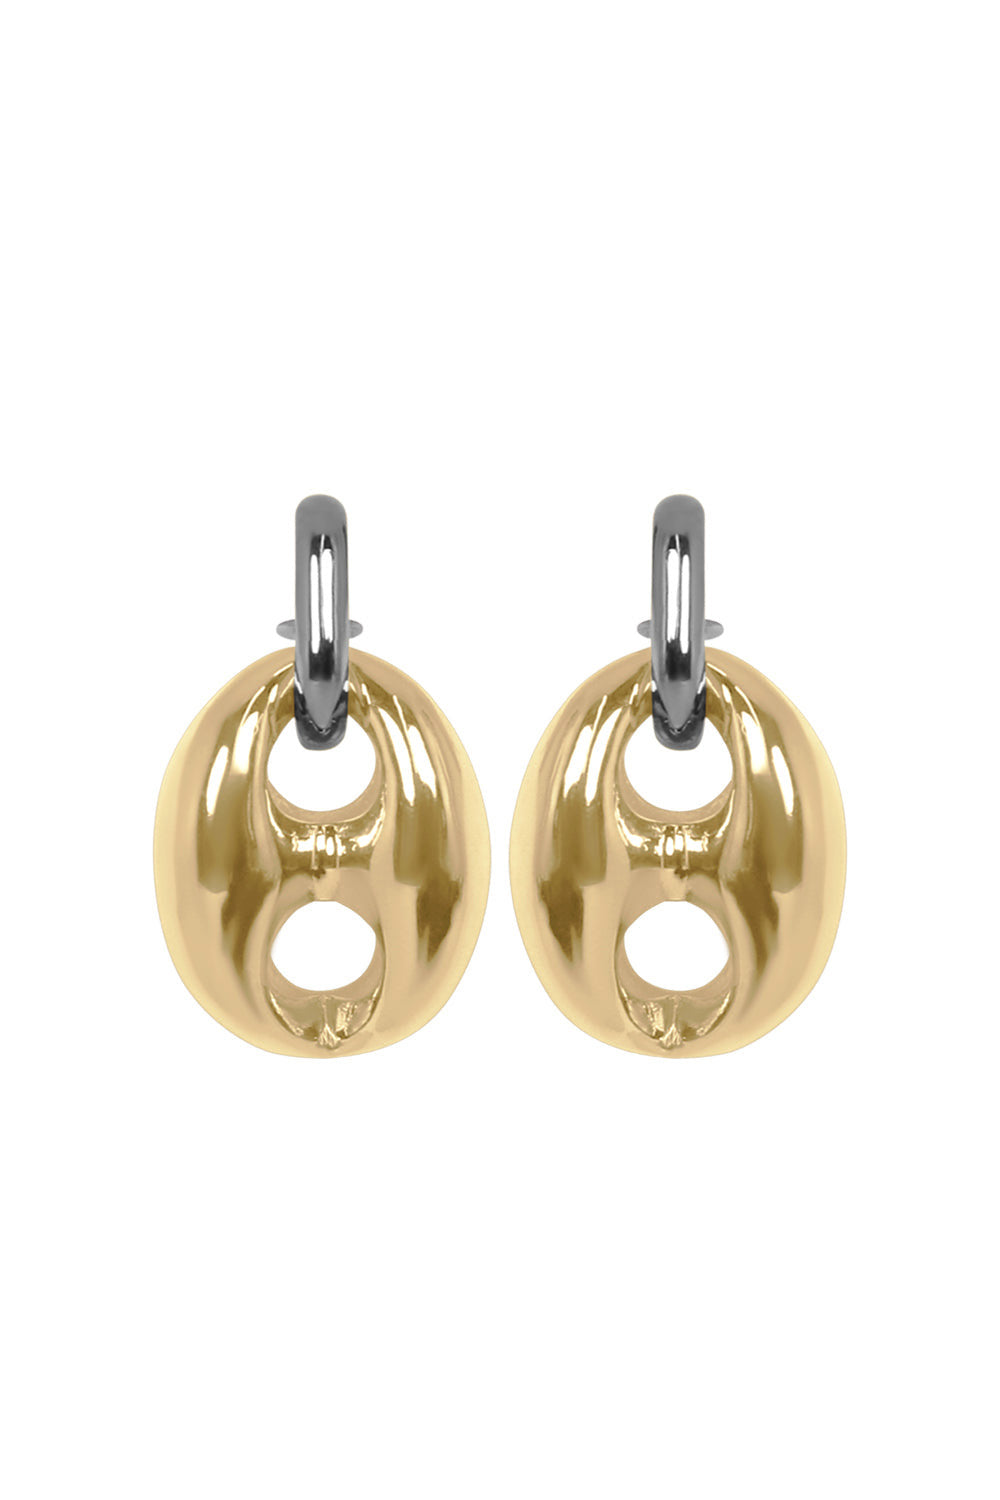 PACO RABANNE JEWELLERY MULTI EXTRA EIGHT EARRING | GOLD/SILVER